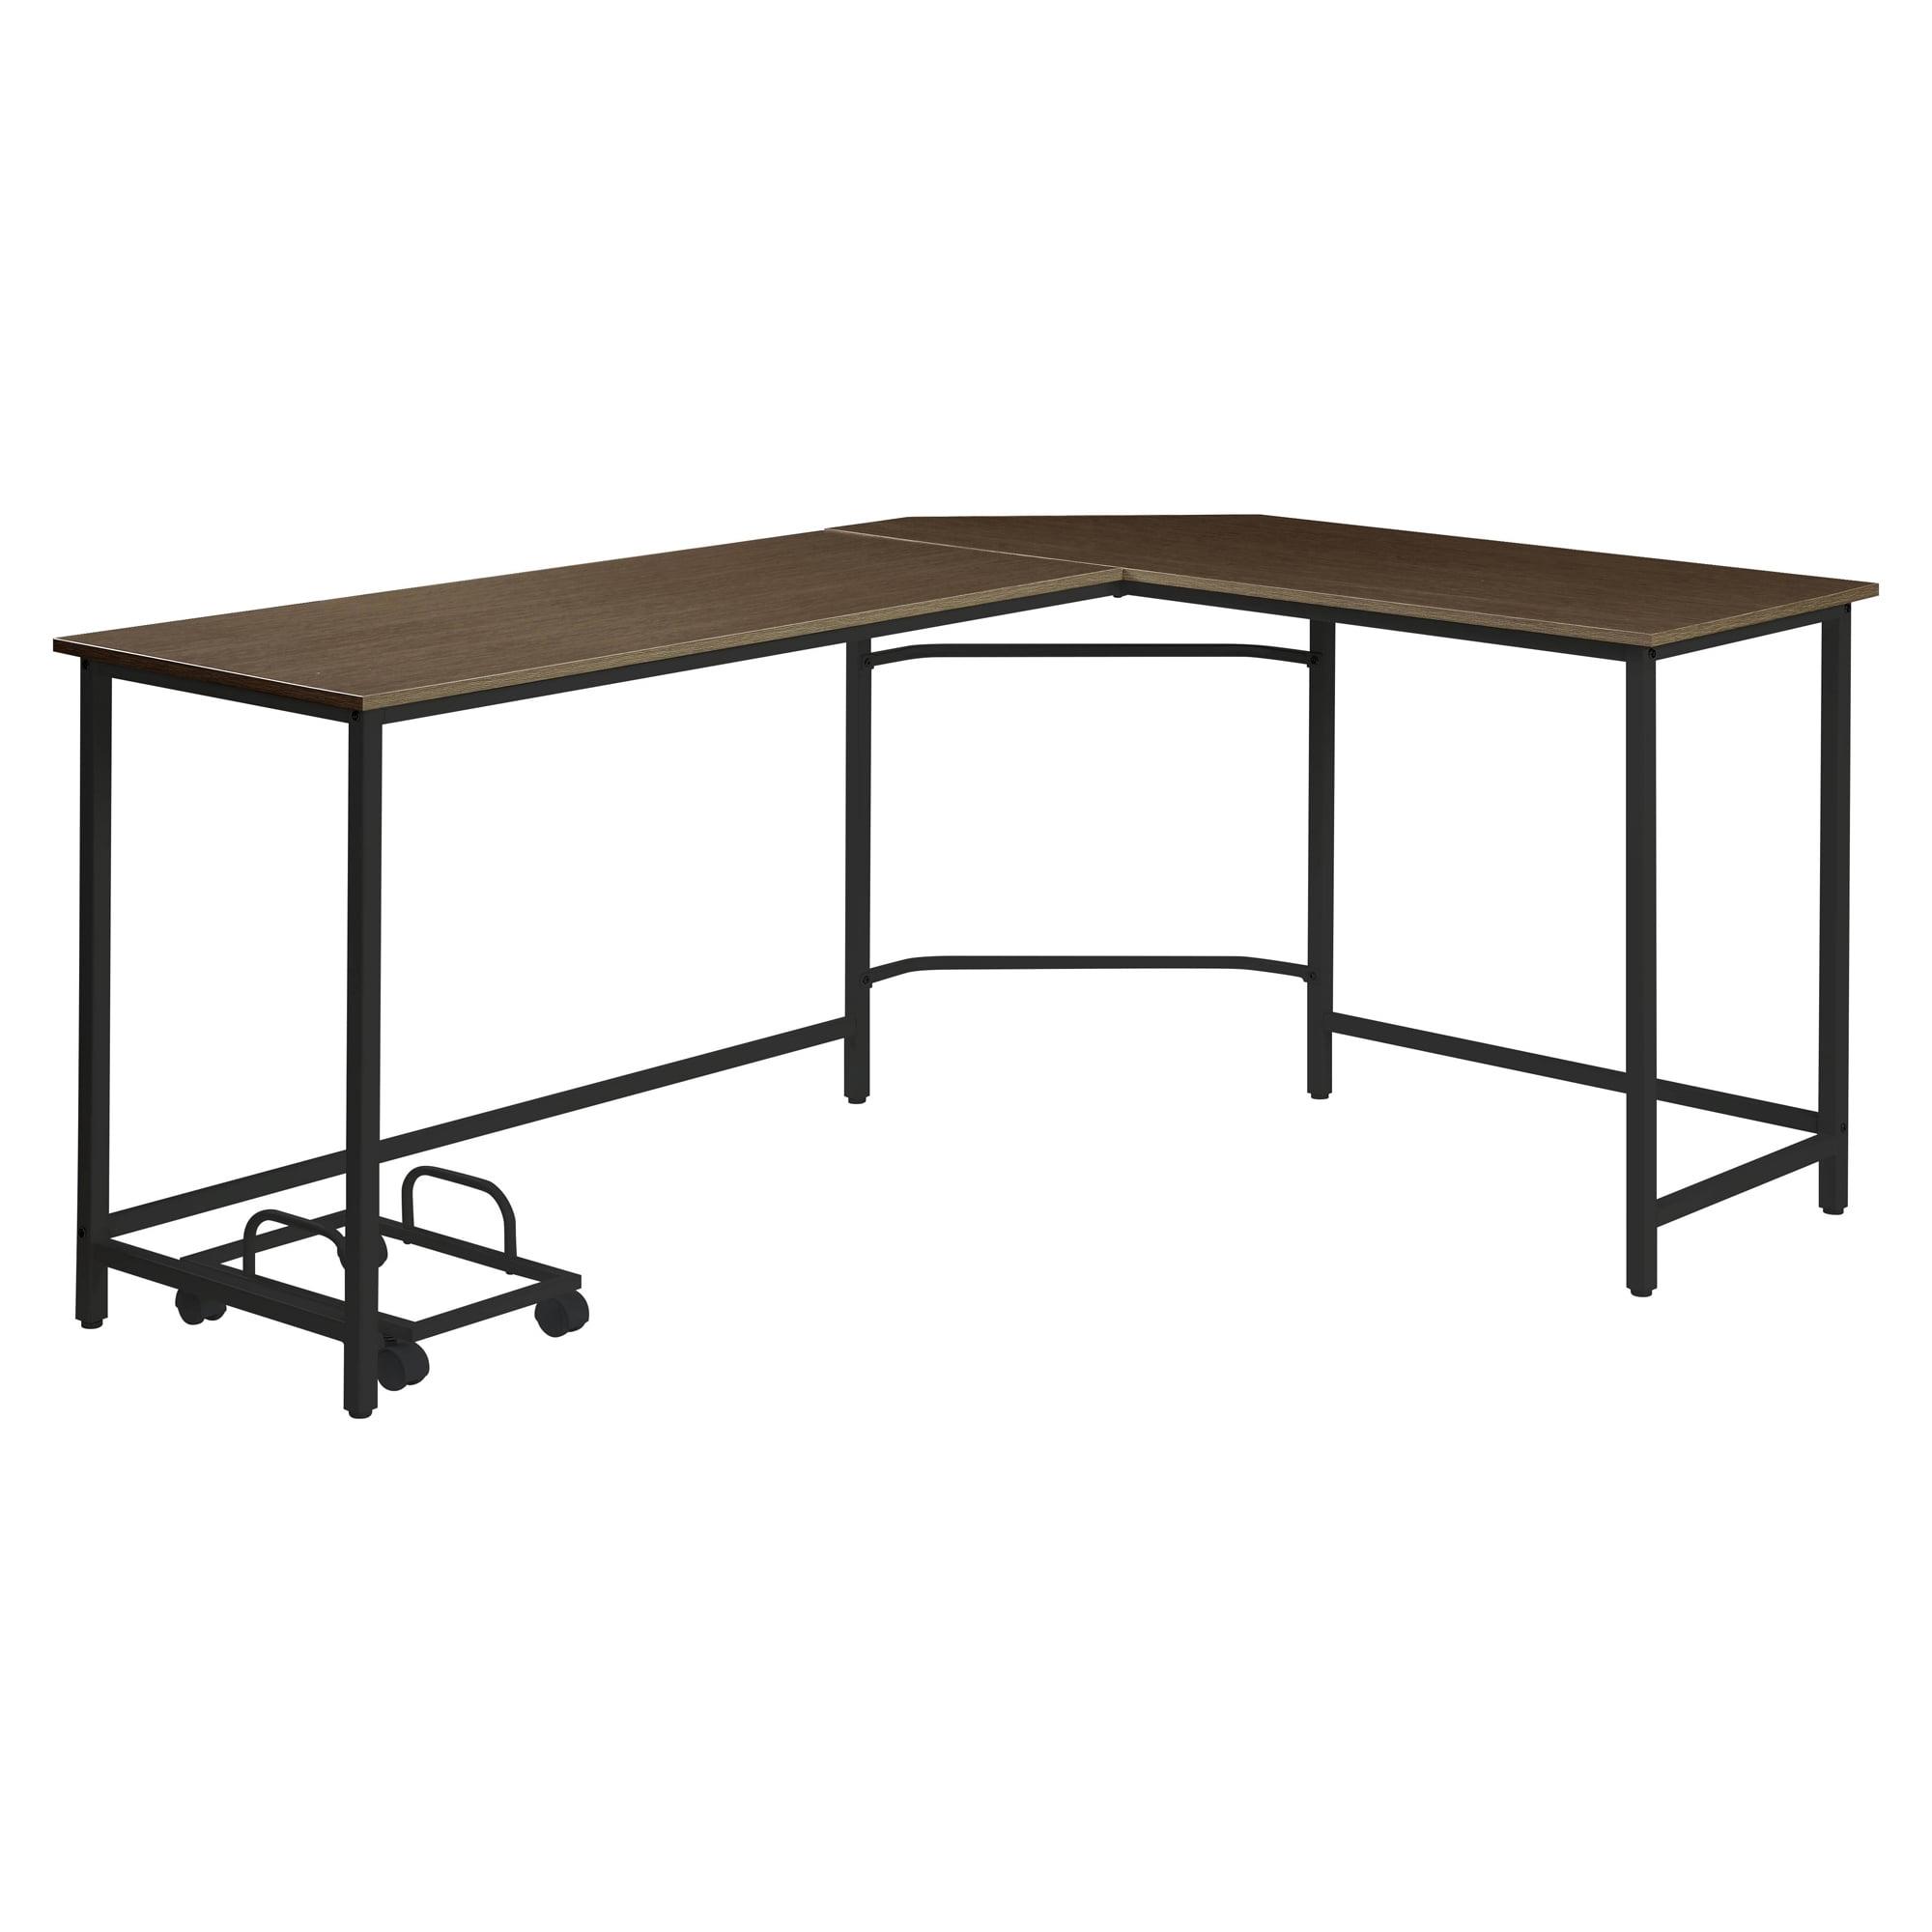 Executive Corner L-Shaped Desk with Drawer and USB Port in Black